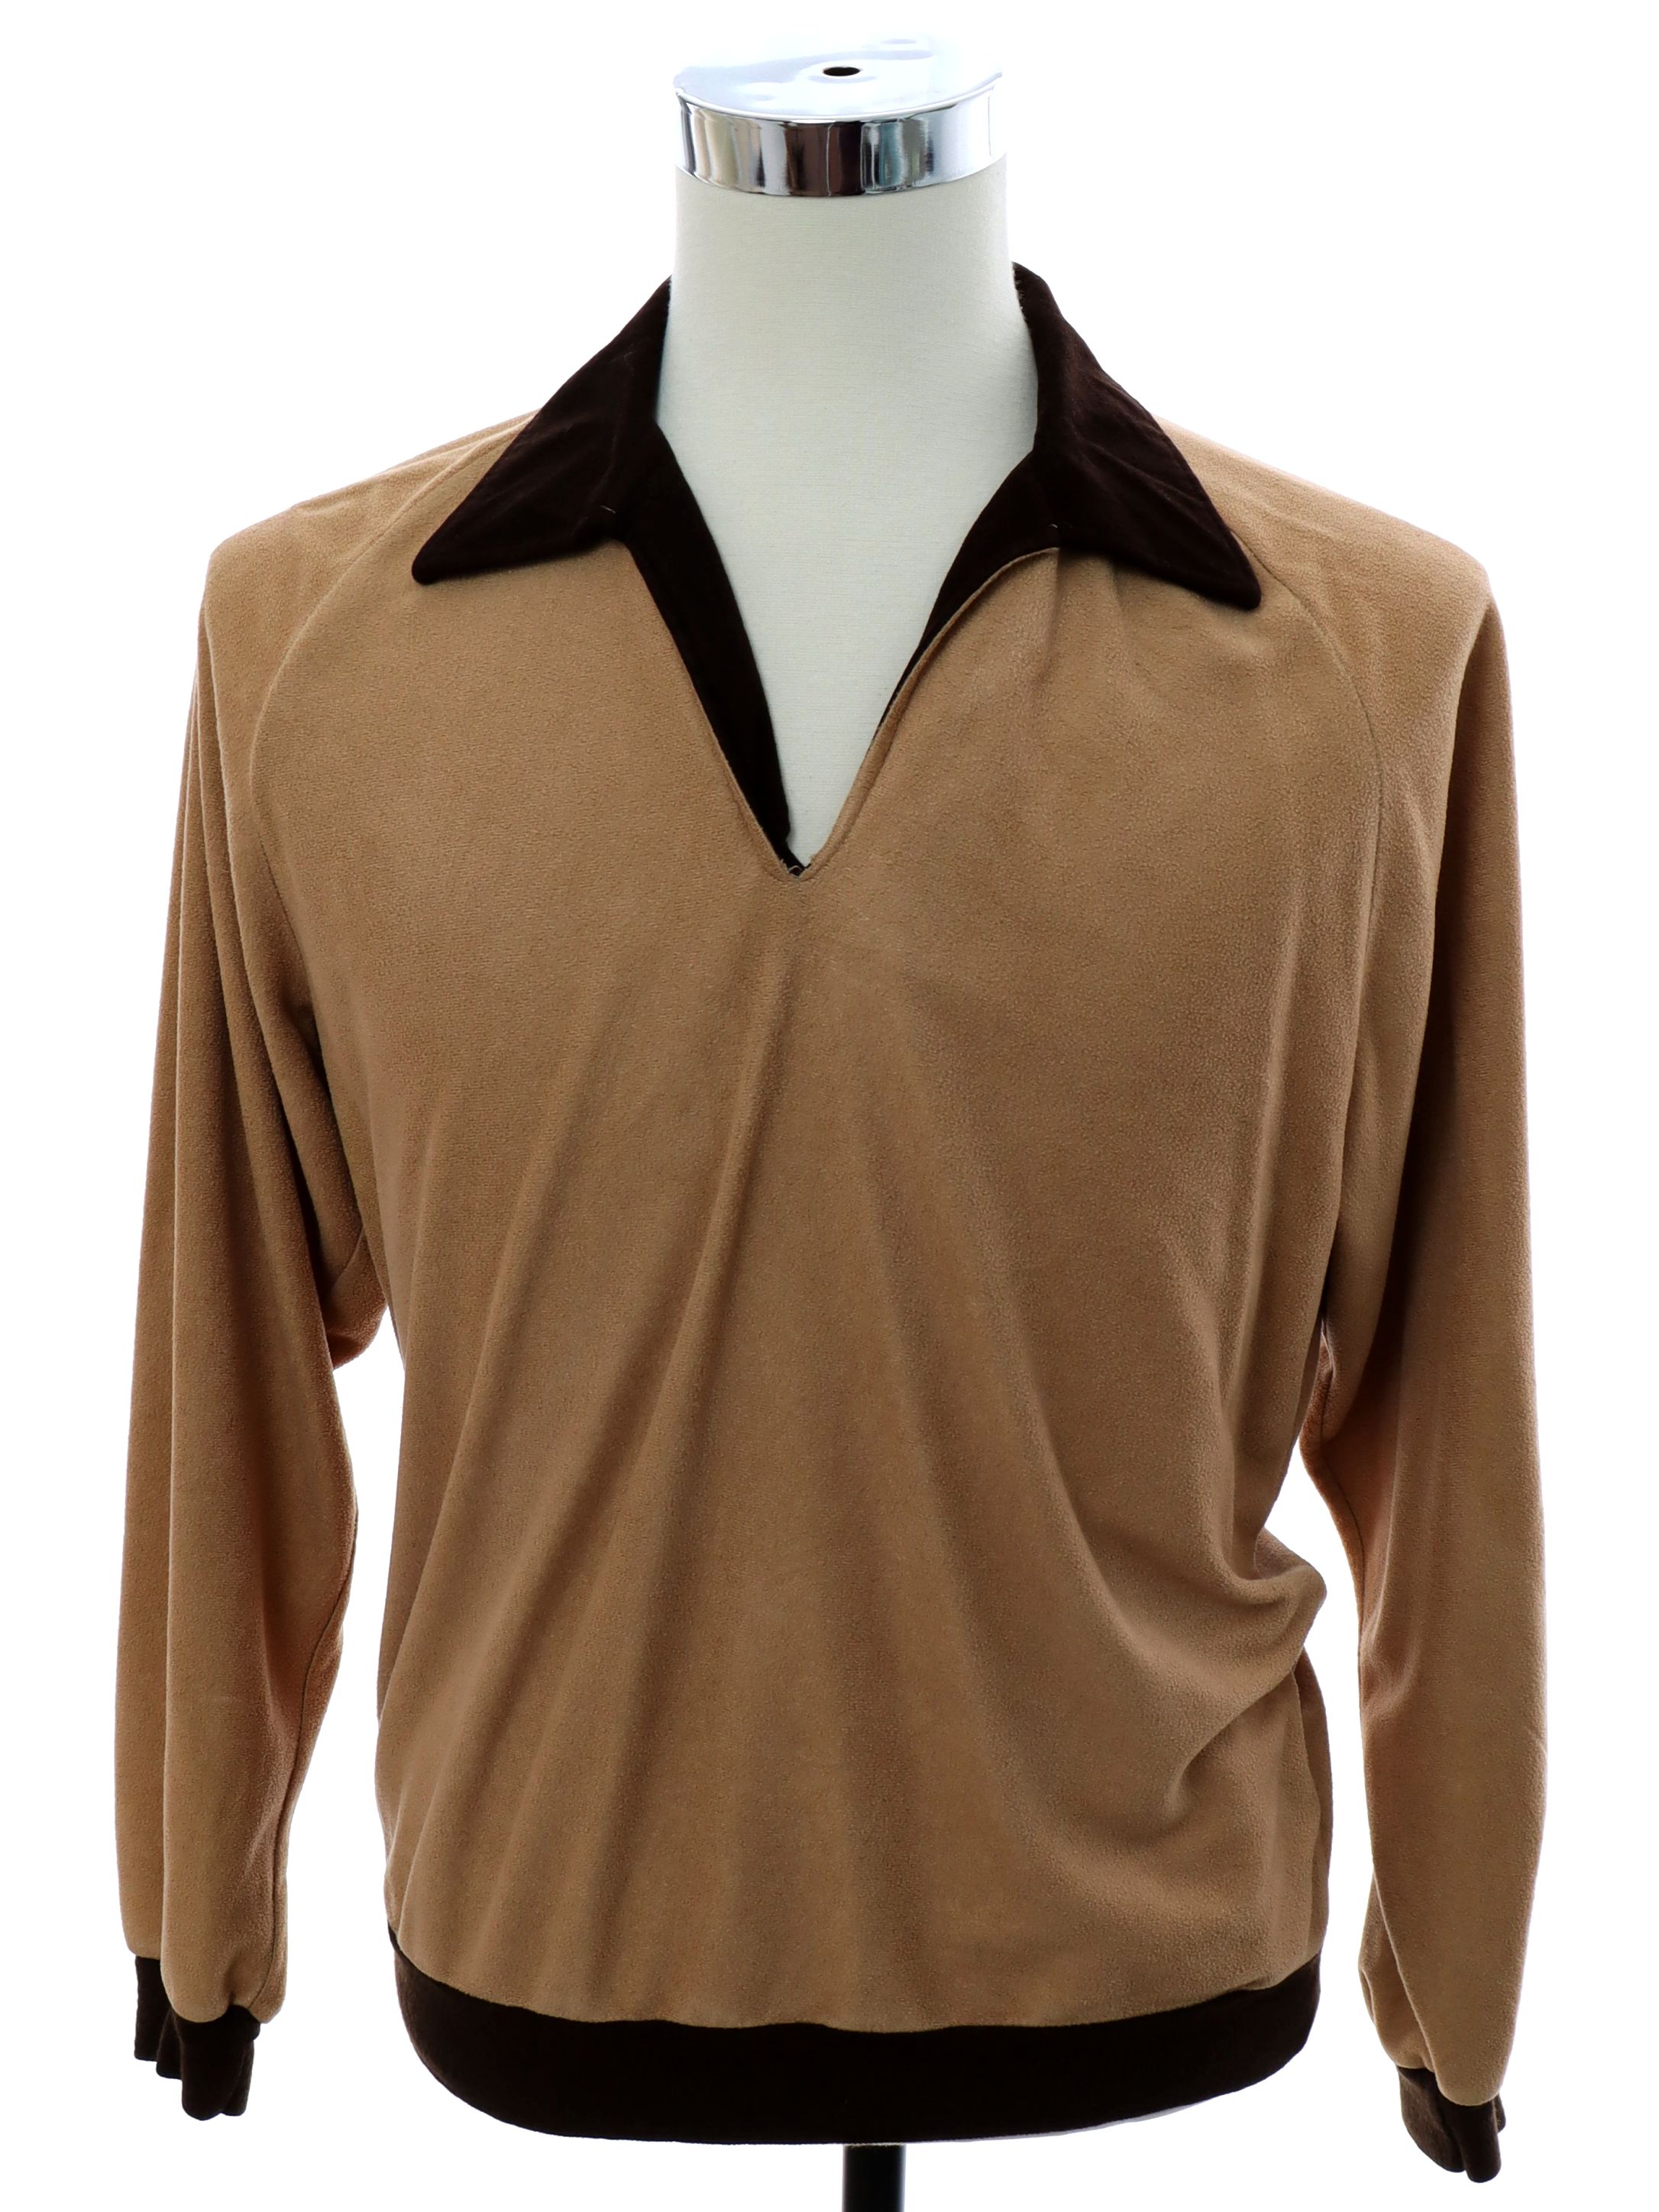 1970's Vintage Sportswear by Country Touch Velour Shirt: Late 70s